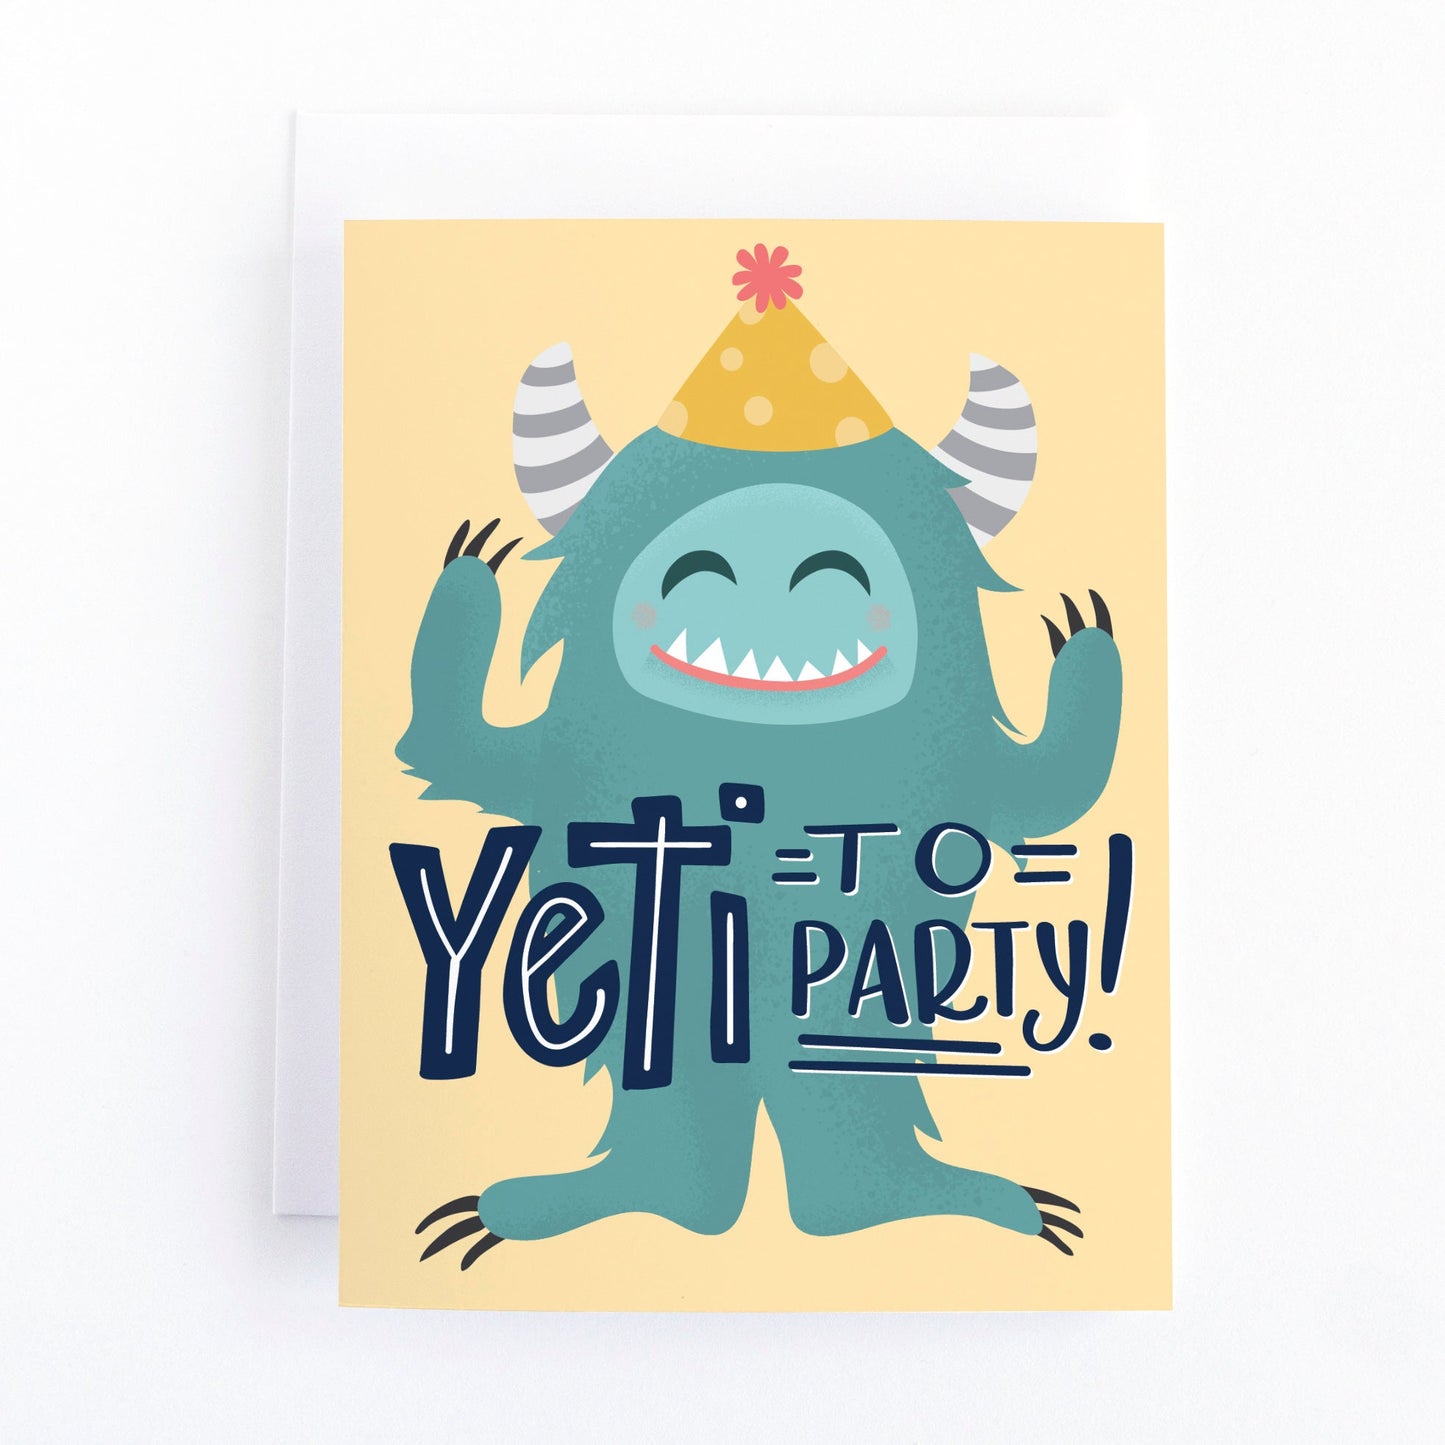 childrens birthday card with a cute yeti monster and the the pun "yeti to party"